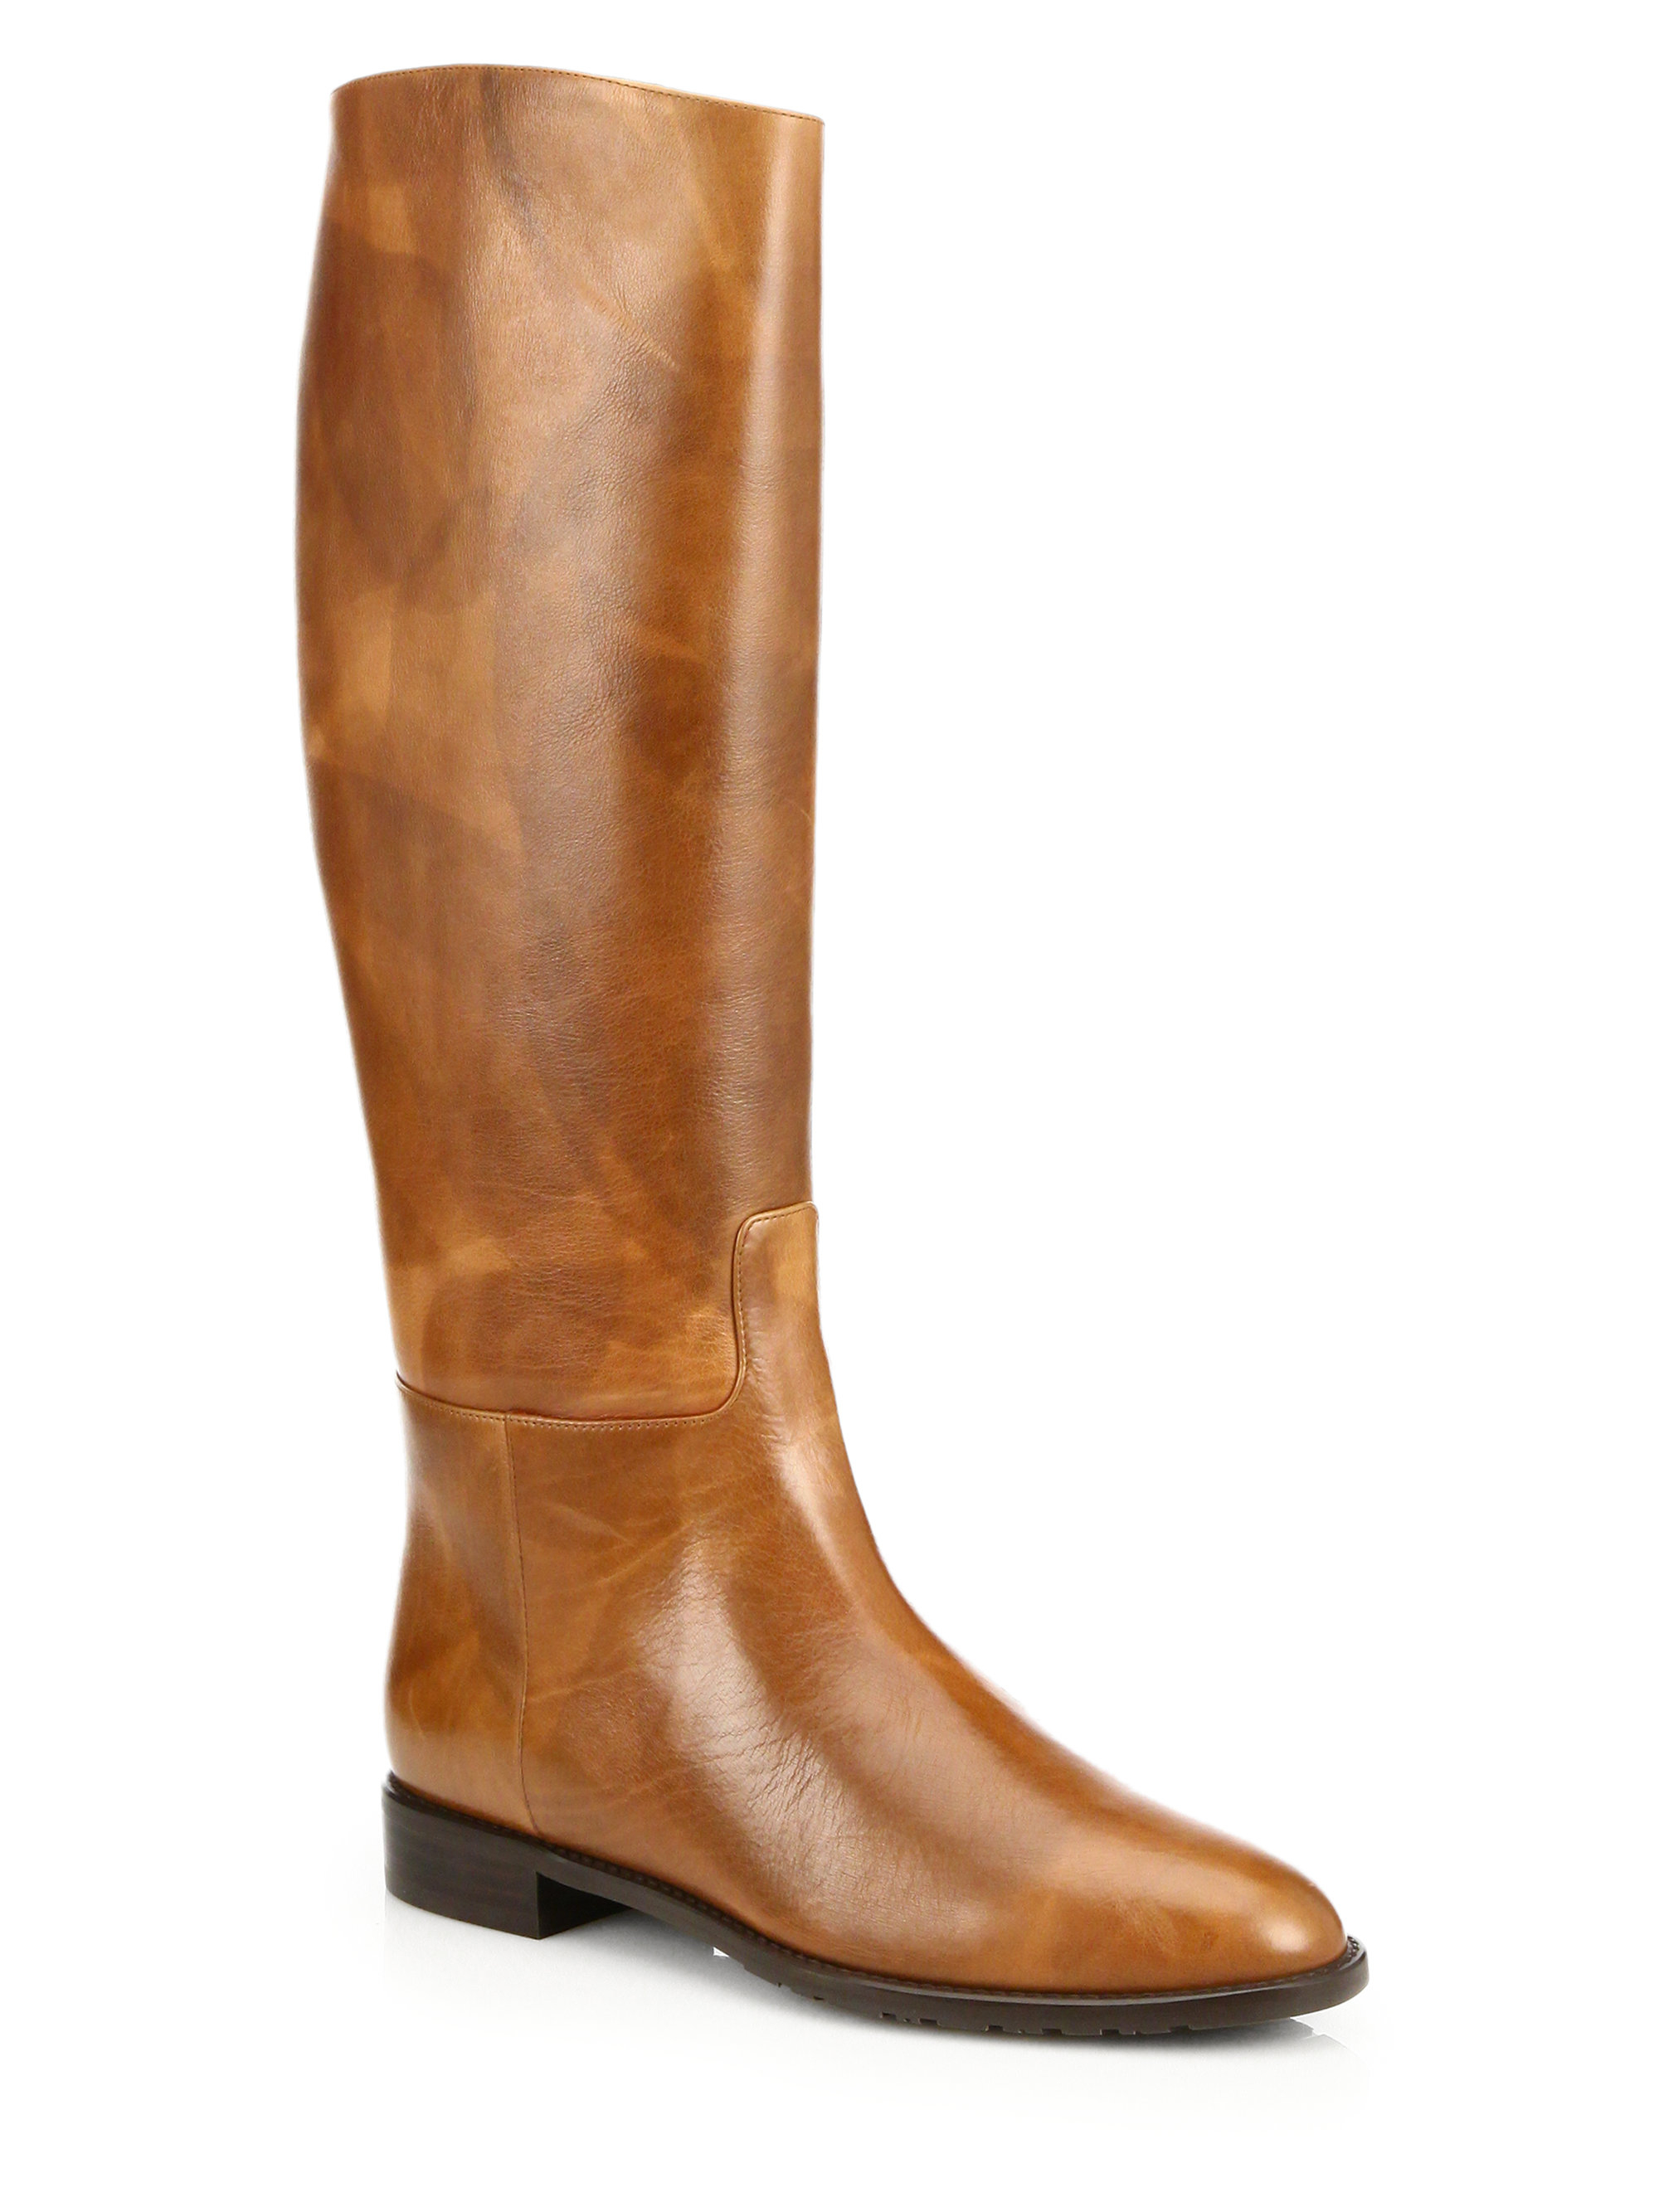 Stuart Weitzman Equine Leather Knee-High Boots in Brown (SADDLE) | Lyst